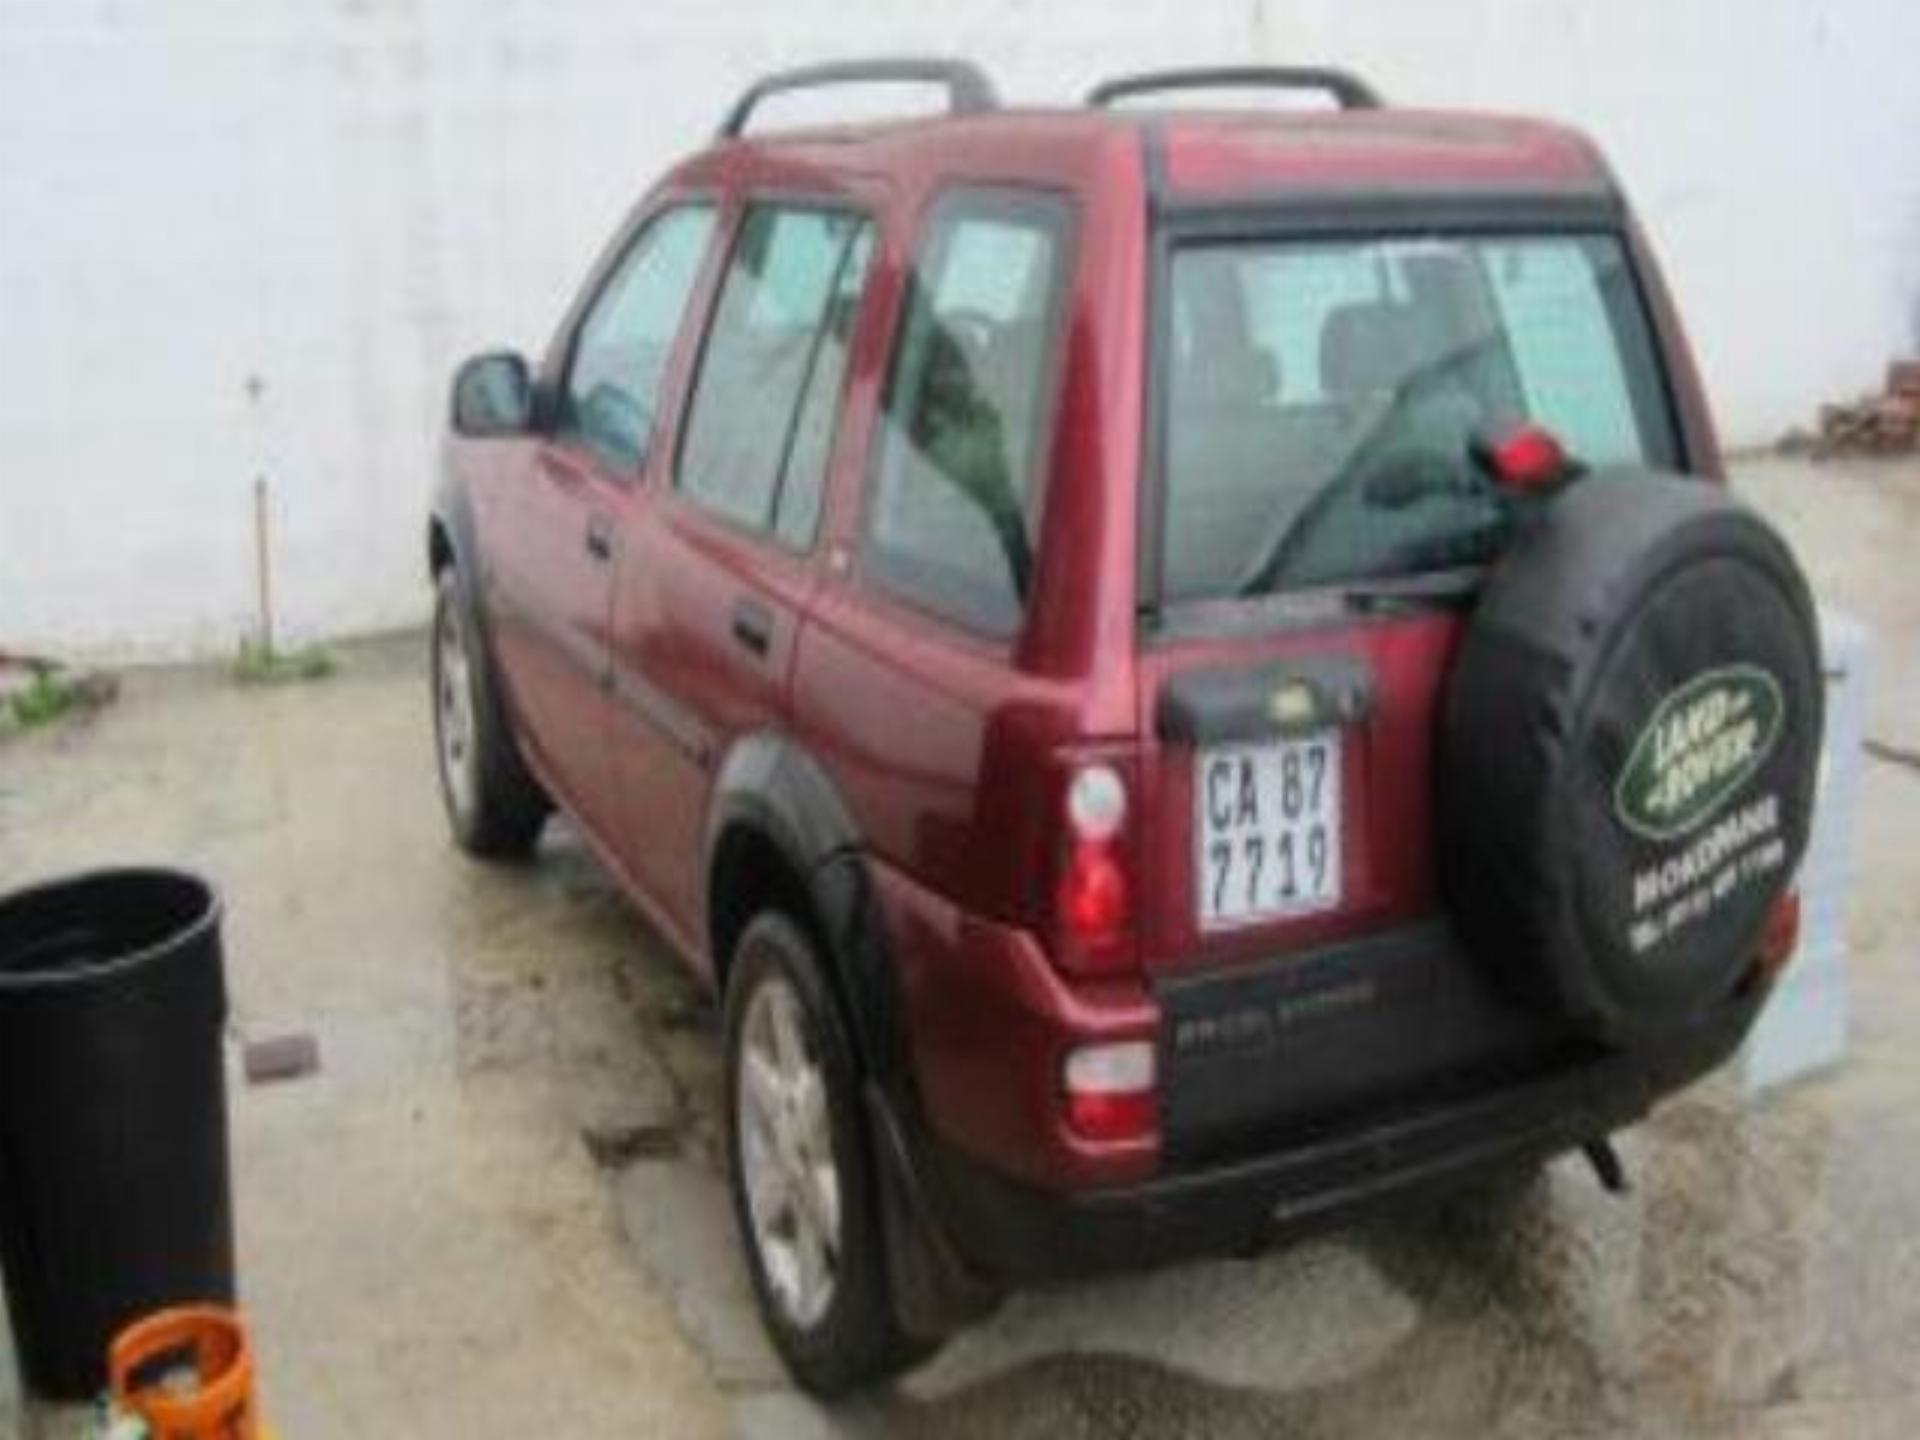 Used Land Rover Freelander II 1.8 2005 on auction PV1001256